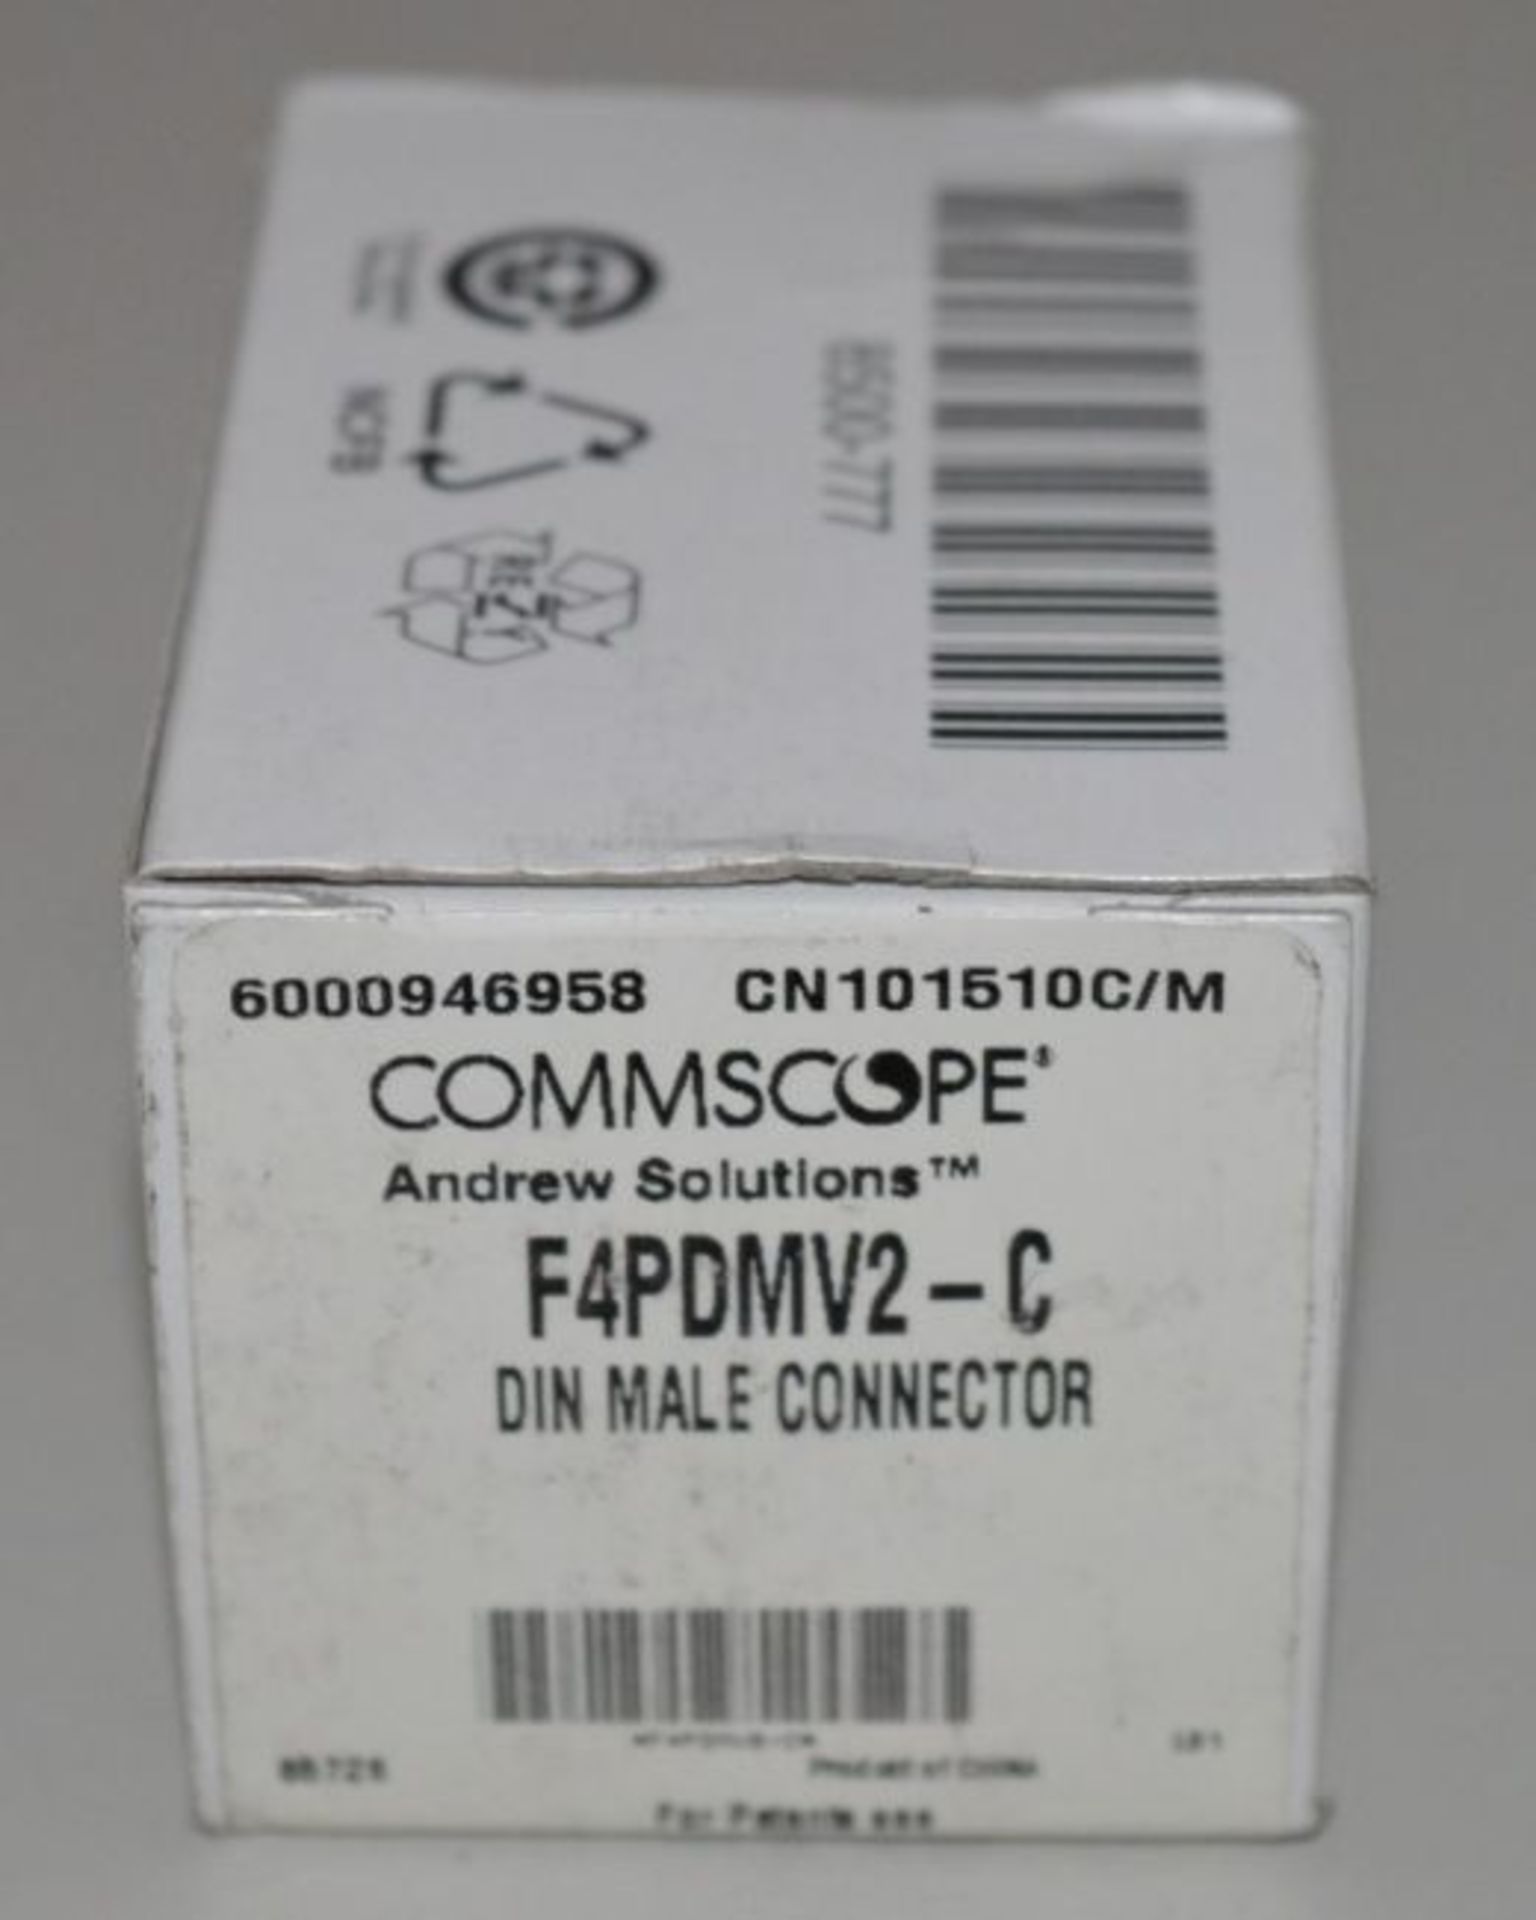 50 x Commscope F4PDMV2-C Din Male Connectors - Andrew Solutions - Brand New and Boxed - CL011 - - Image 2 of 5